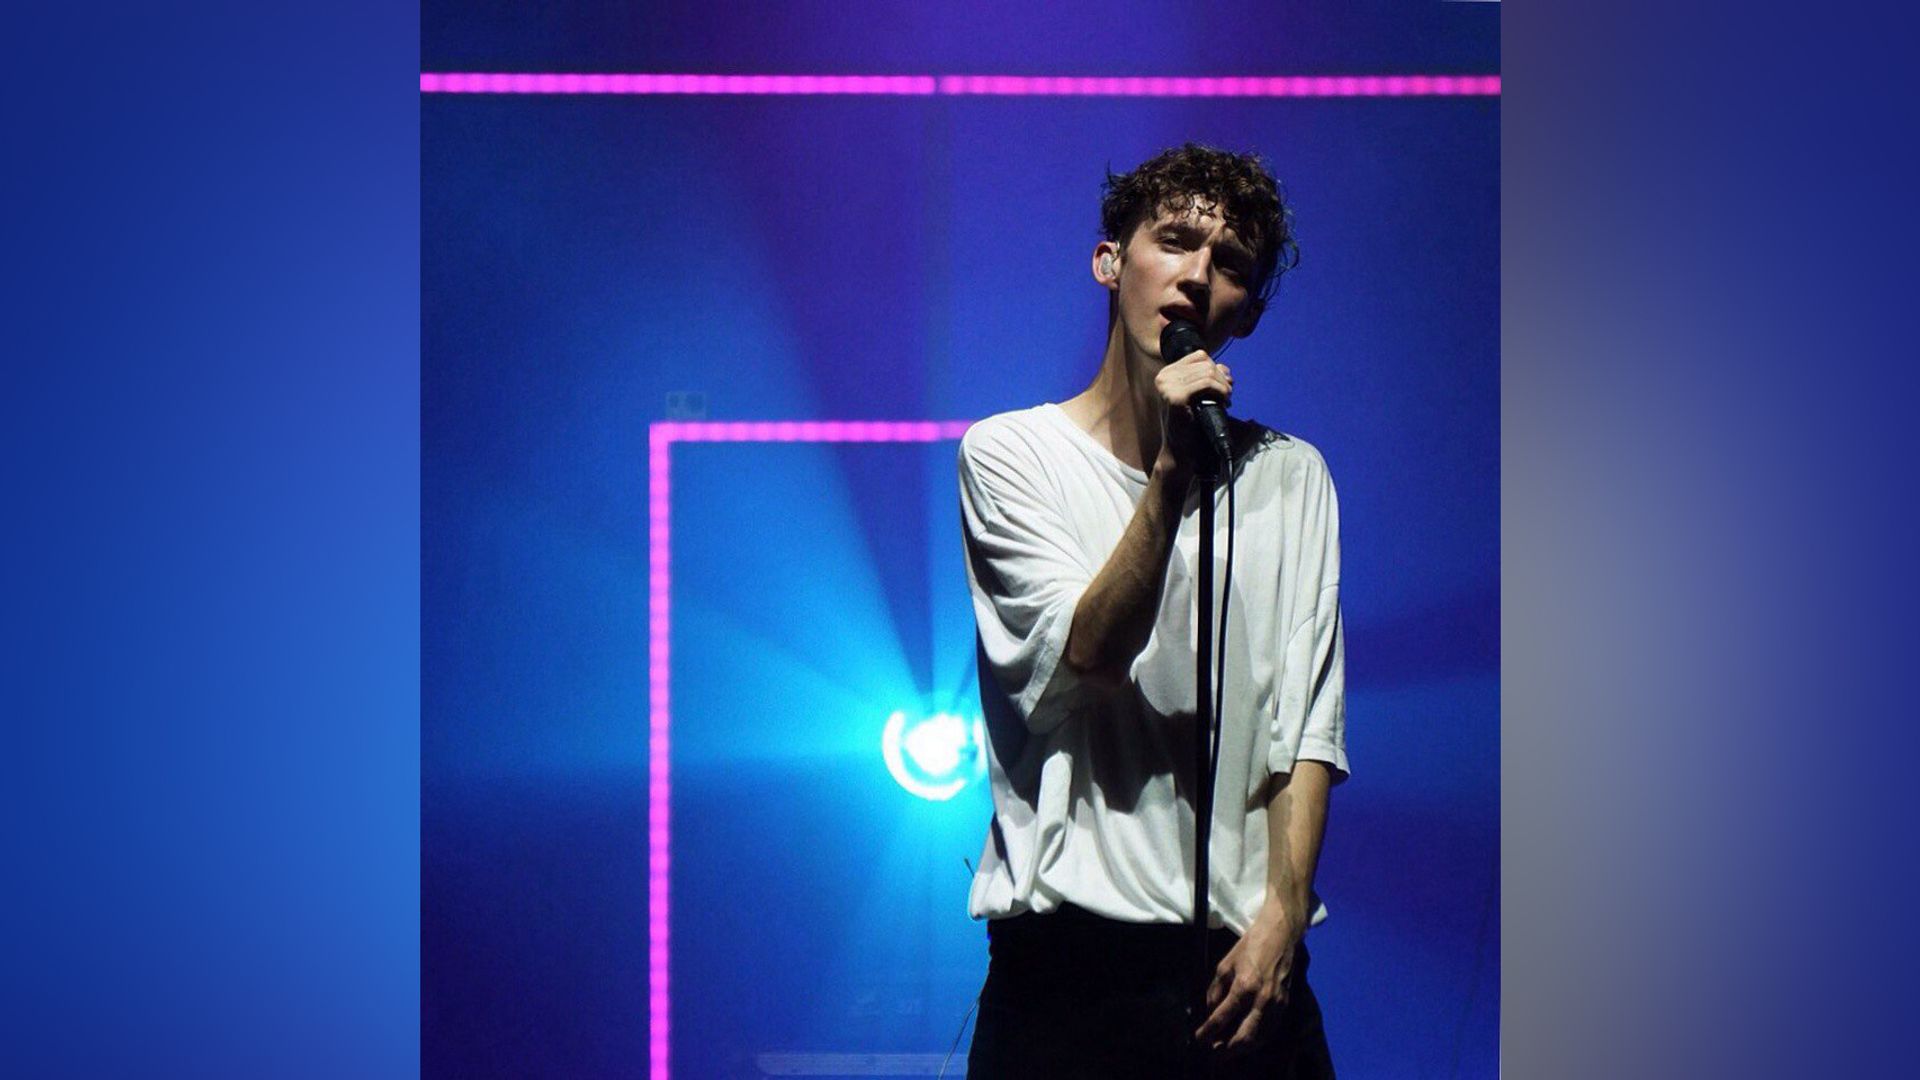 Troye's show in 2016